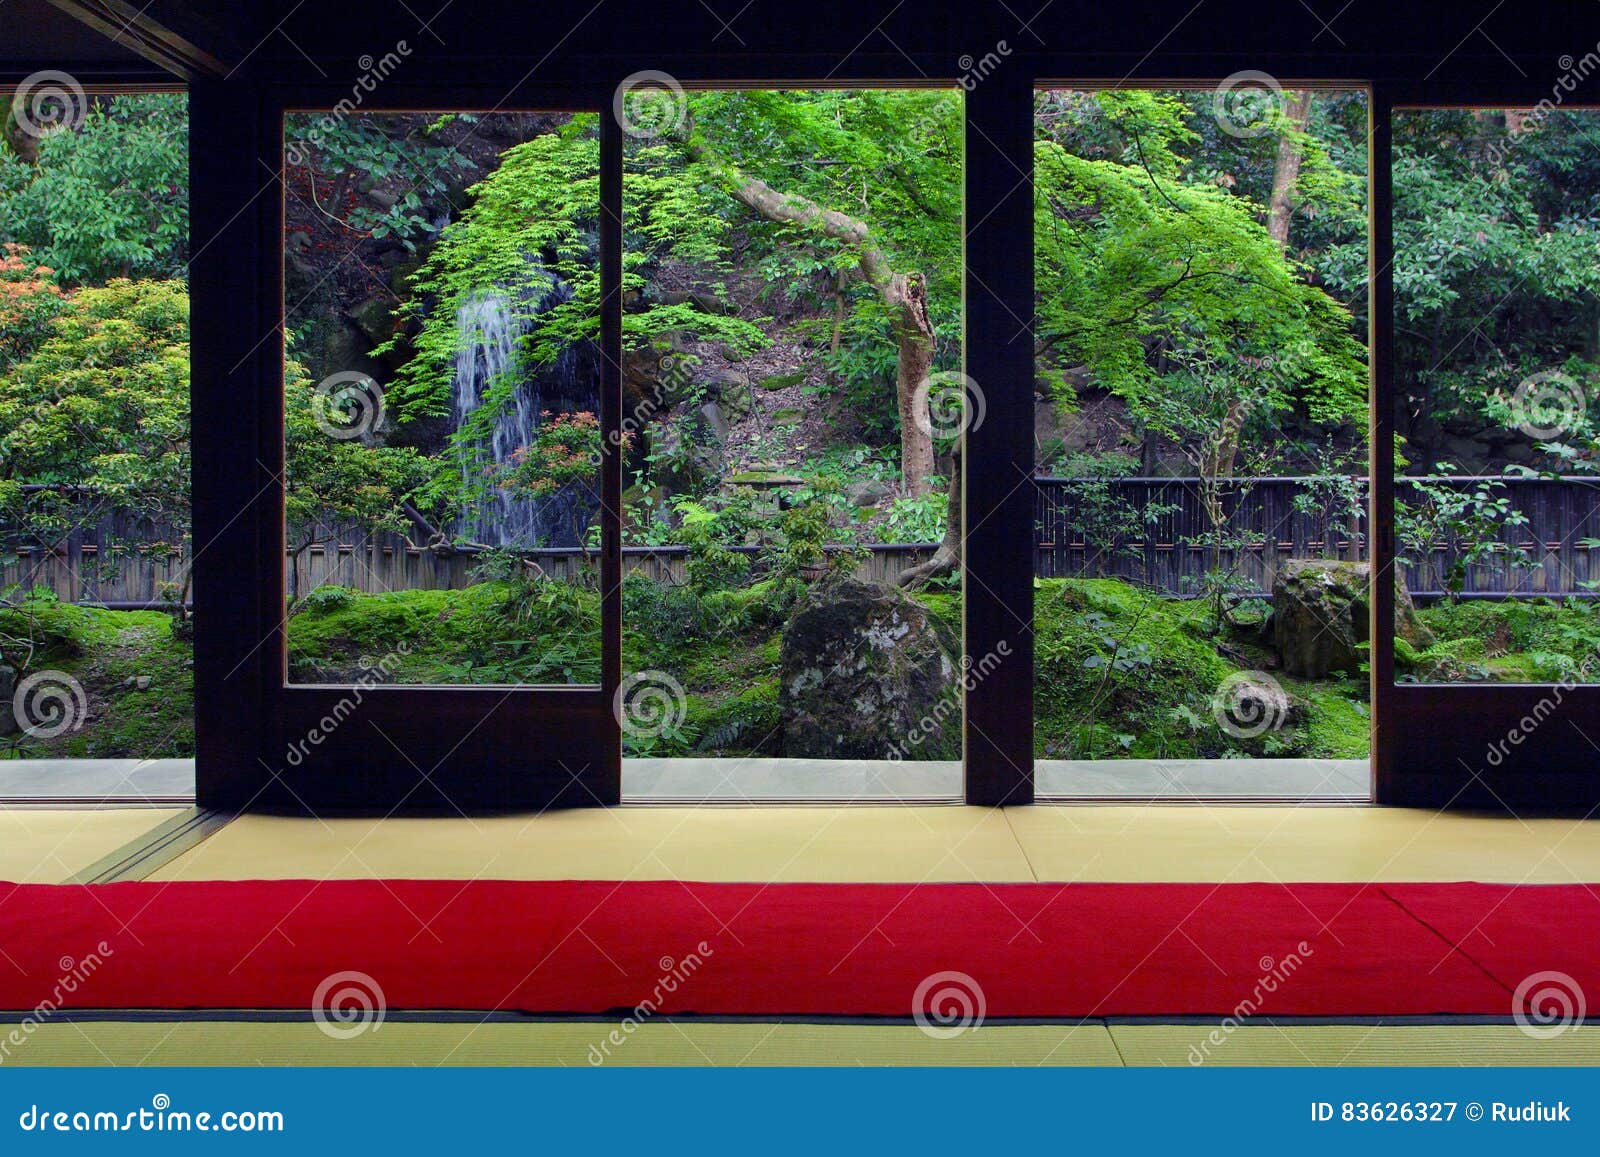 View From Inside On A Japanese Garden In Kyoto Stock Image